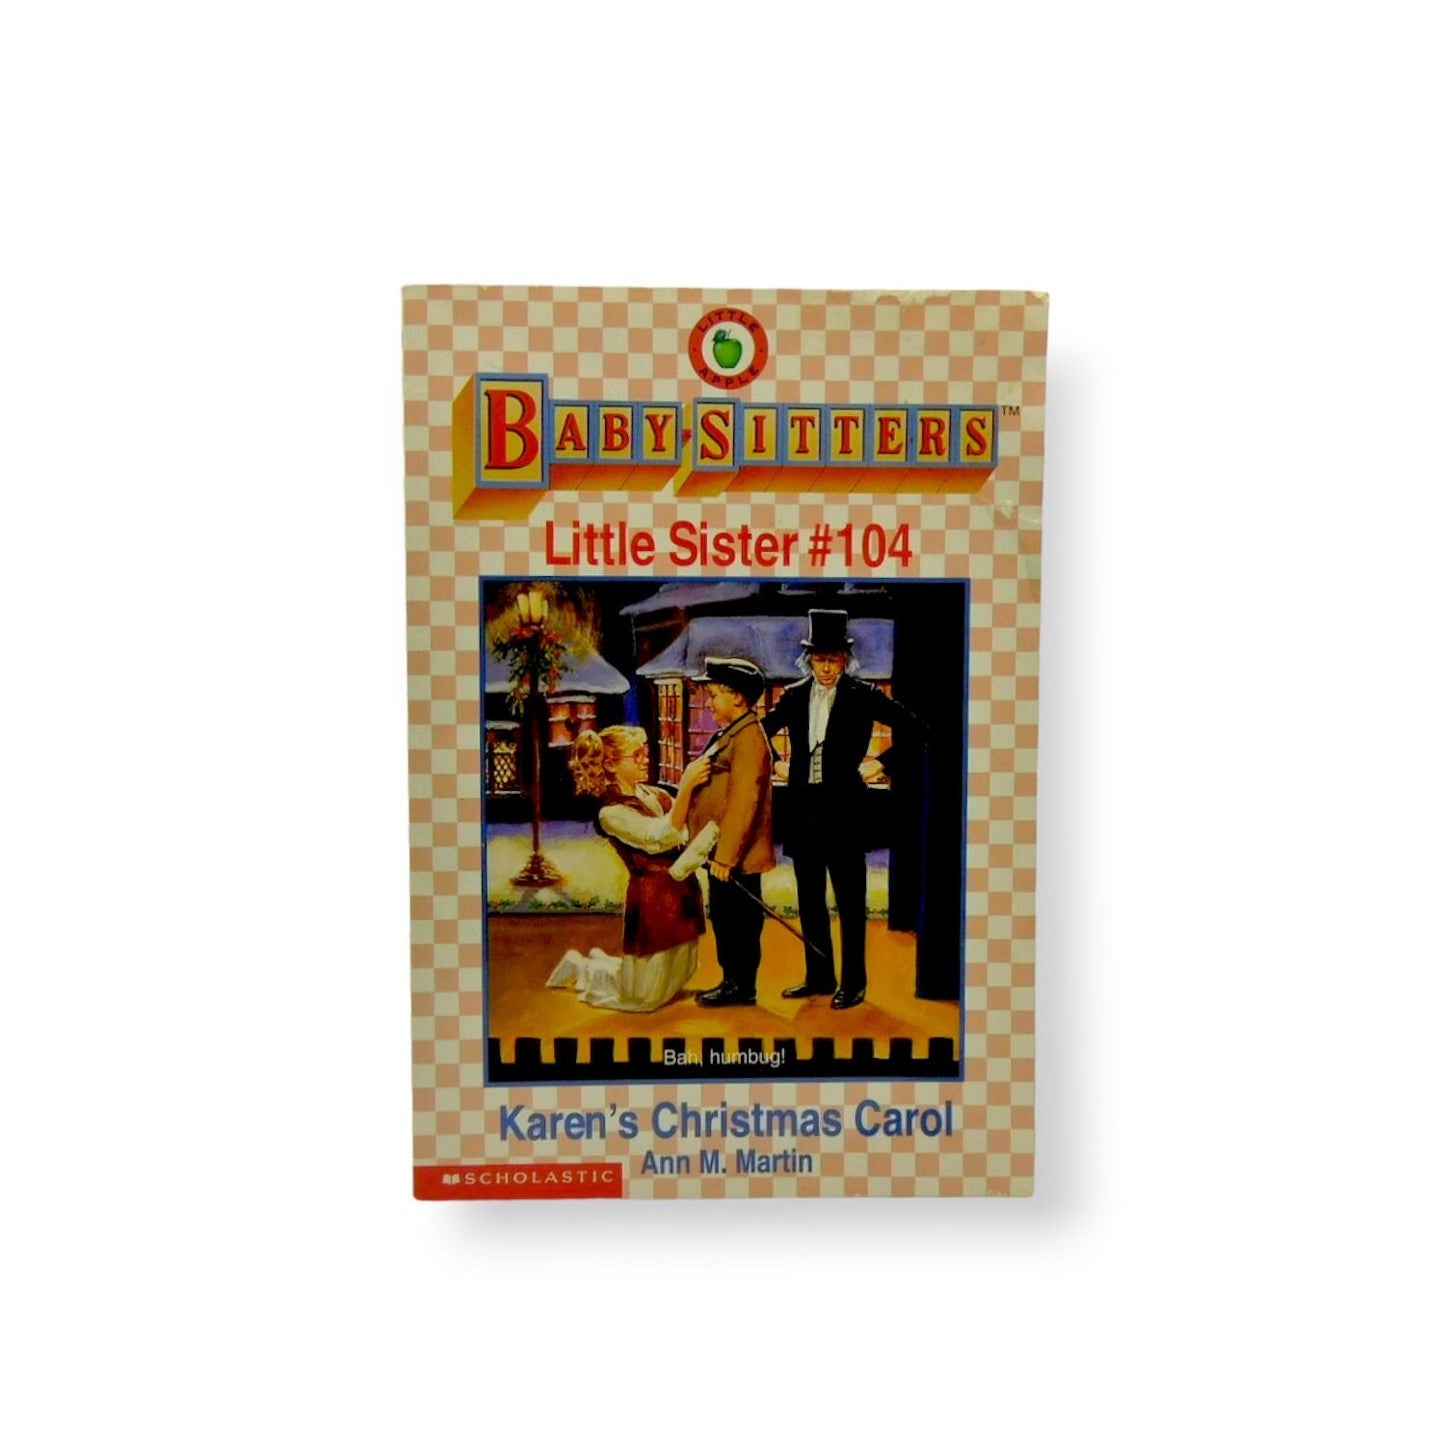 The Baby Sitters Club by Ann M. Martin